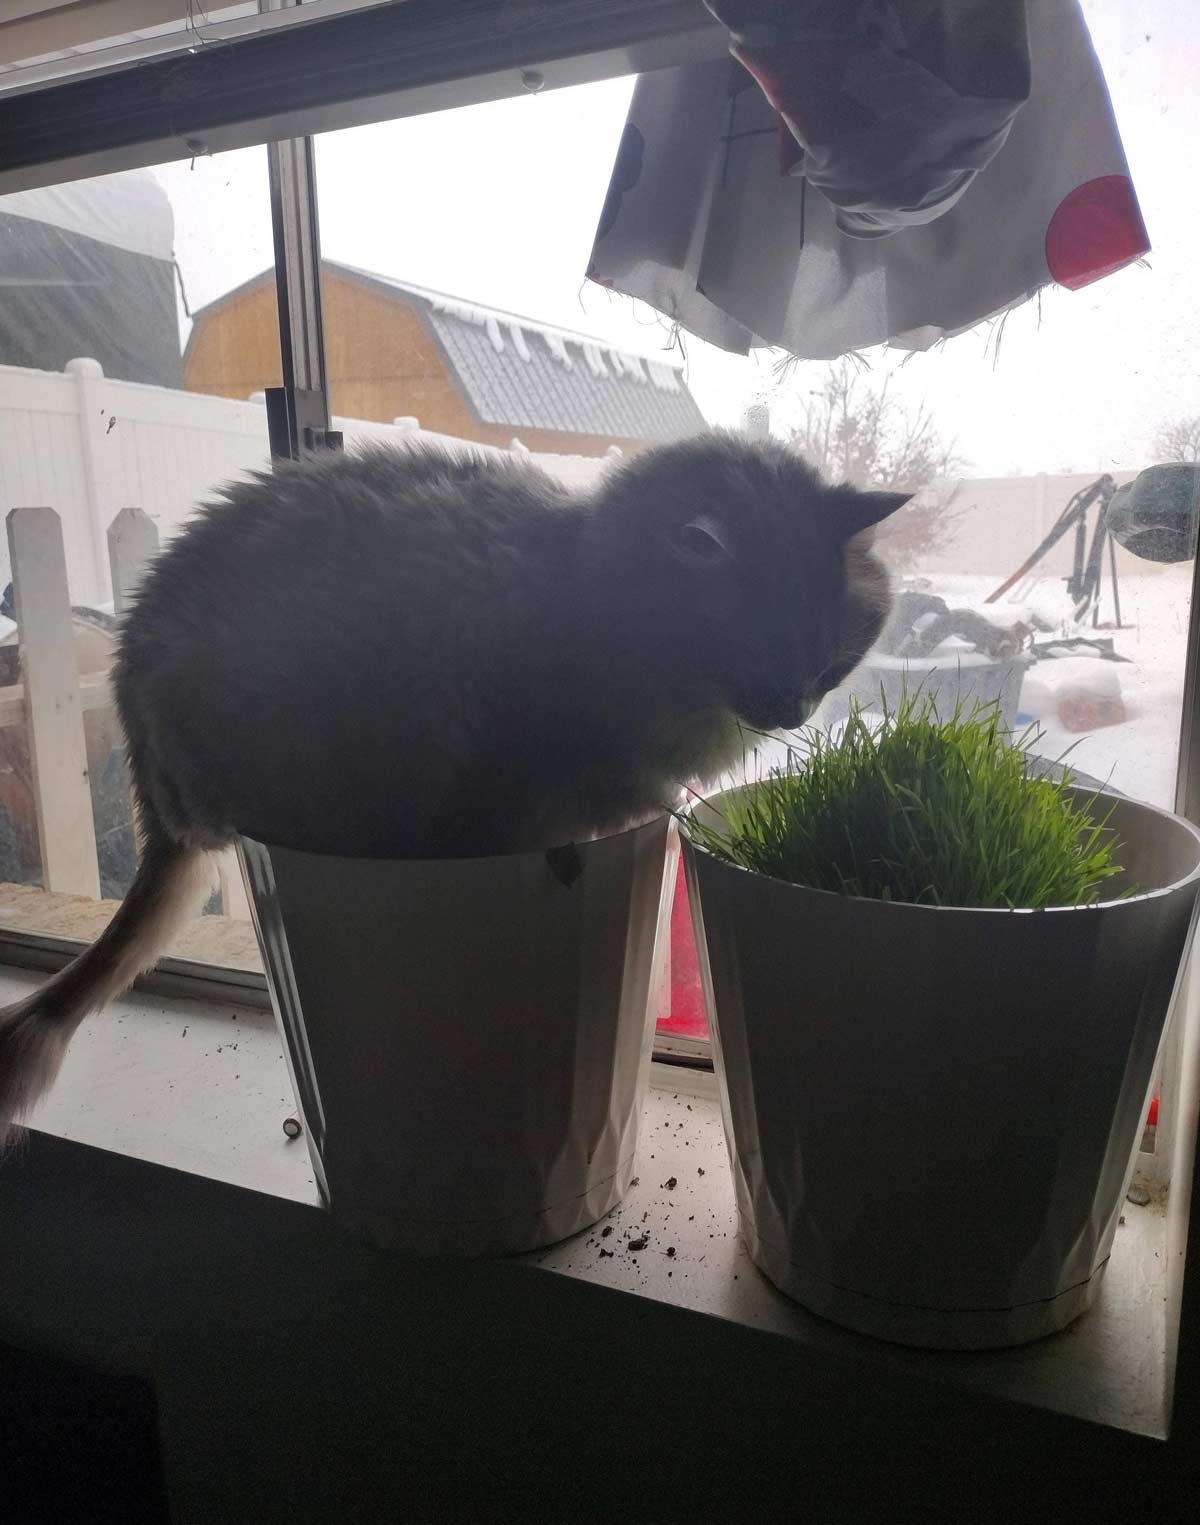 Had basil and wheatgrass next to each other. Grass was doing fine, I couldn't figure out why the basil died. Walked in on this